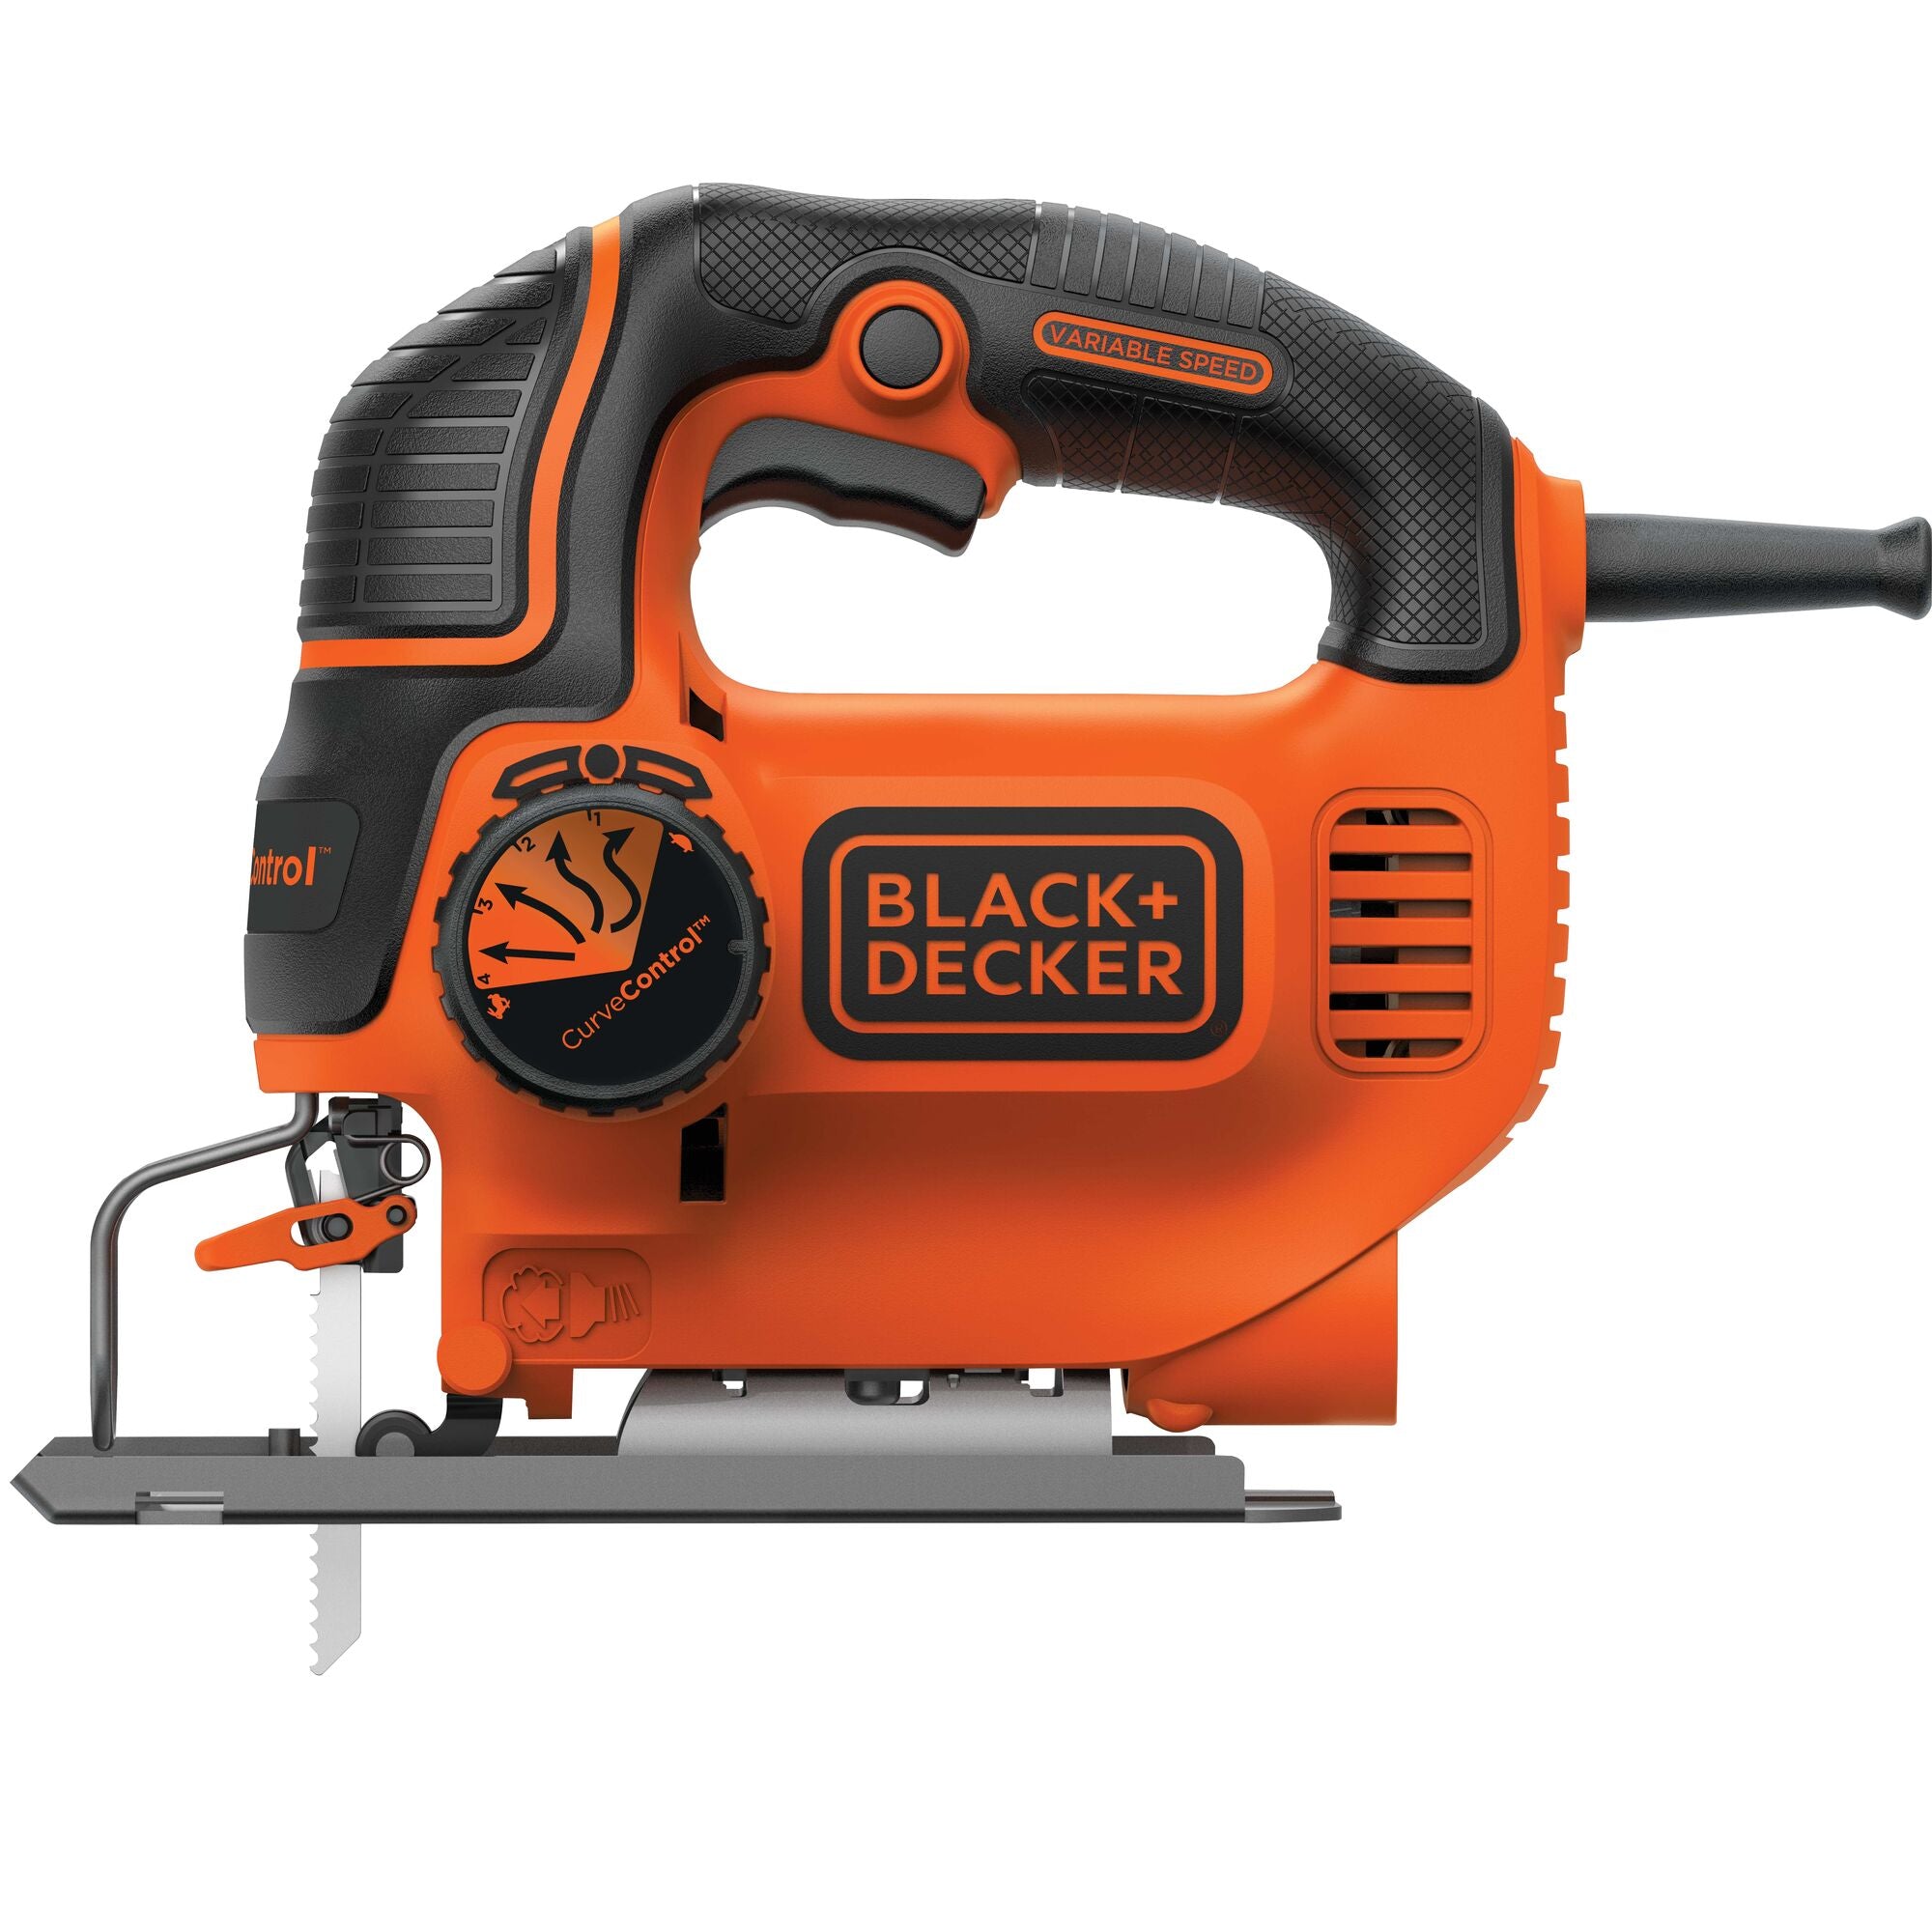 A person cuts wood with the BLACK+DECKER 5.0-Amp Jig Saw With Smart Select. Precise beveled cuts up to 45 degrees with adjustable shoe.